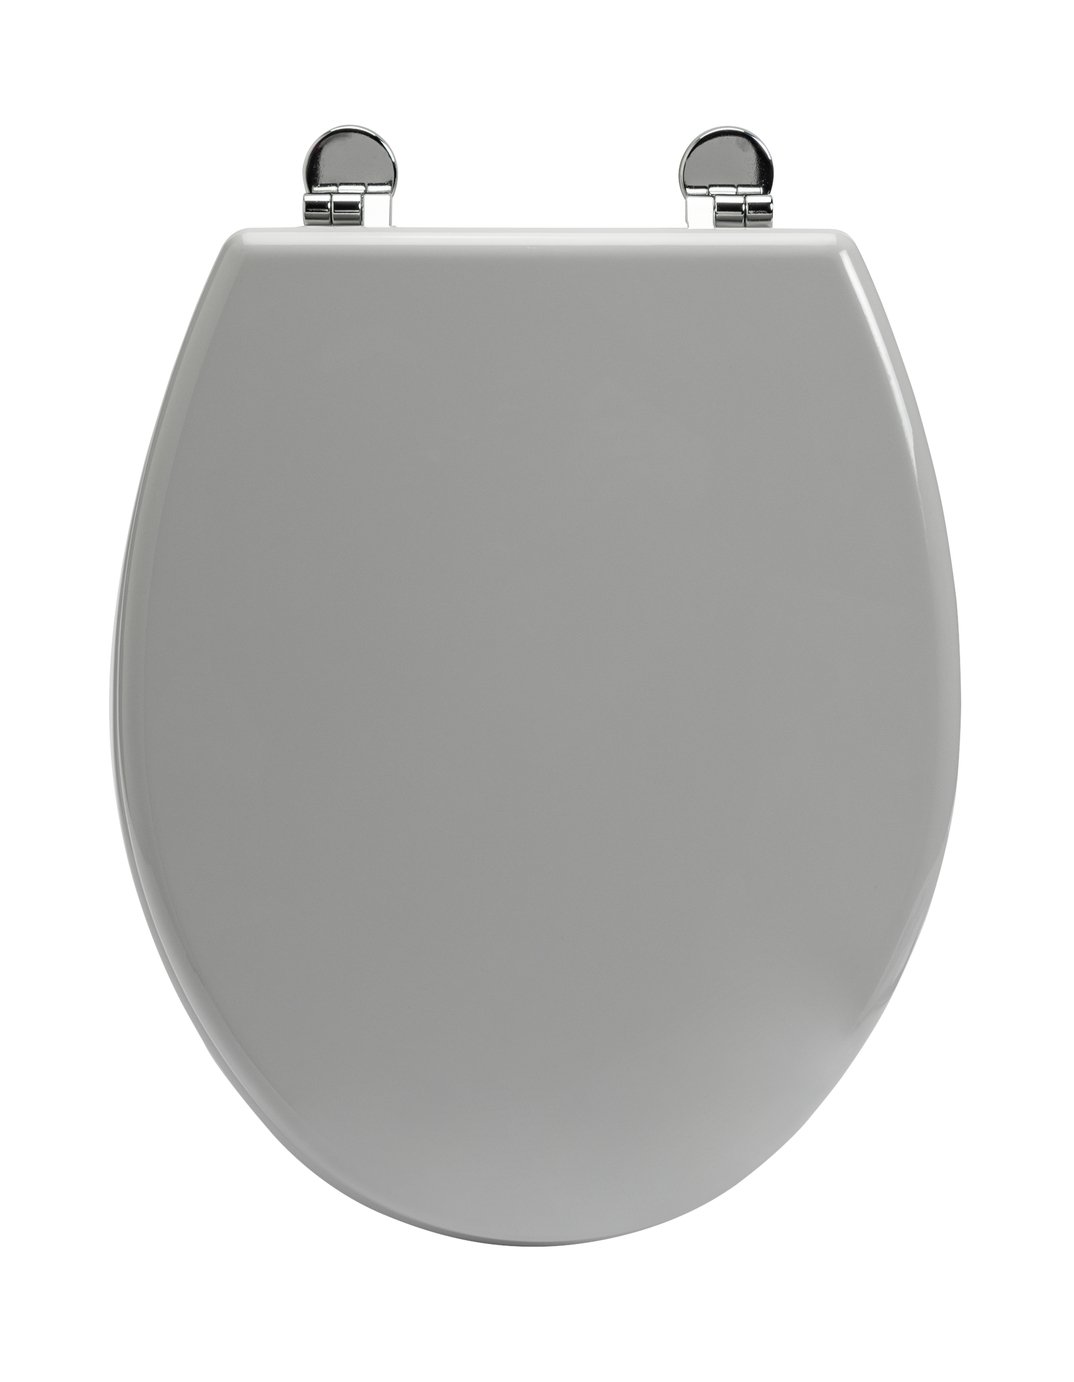 Argos Home Moulded Wood Toilet Seat - Grey 